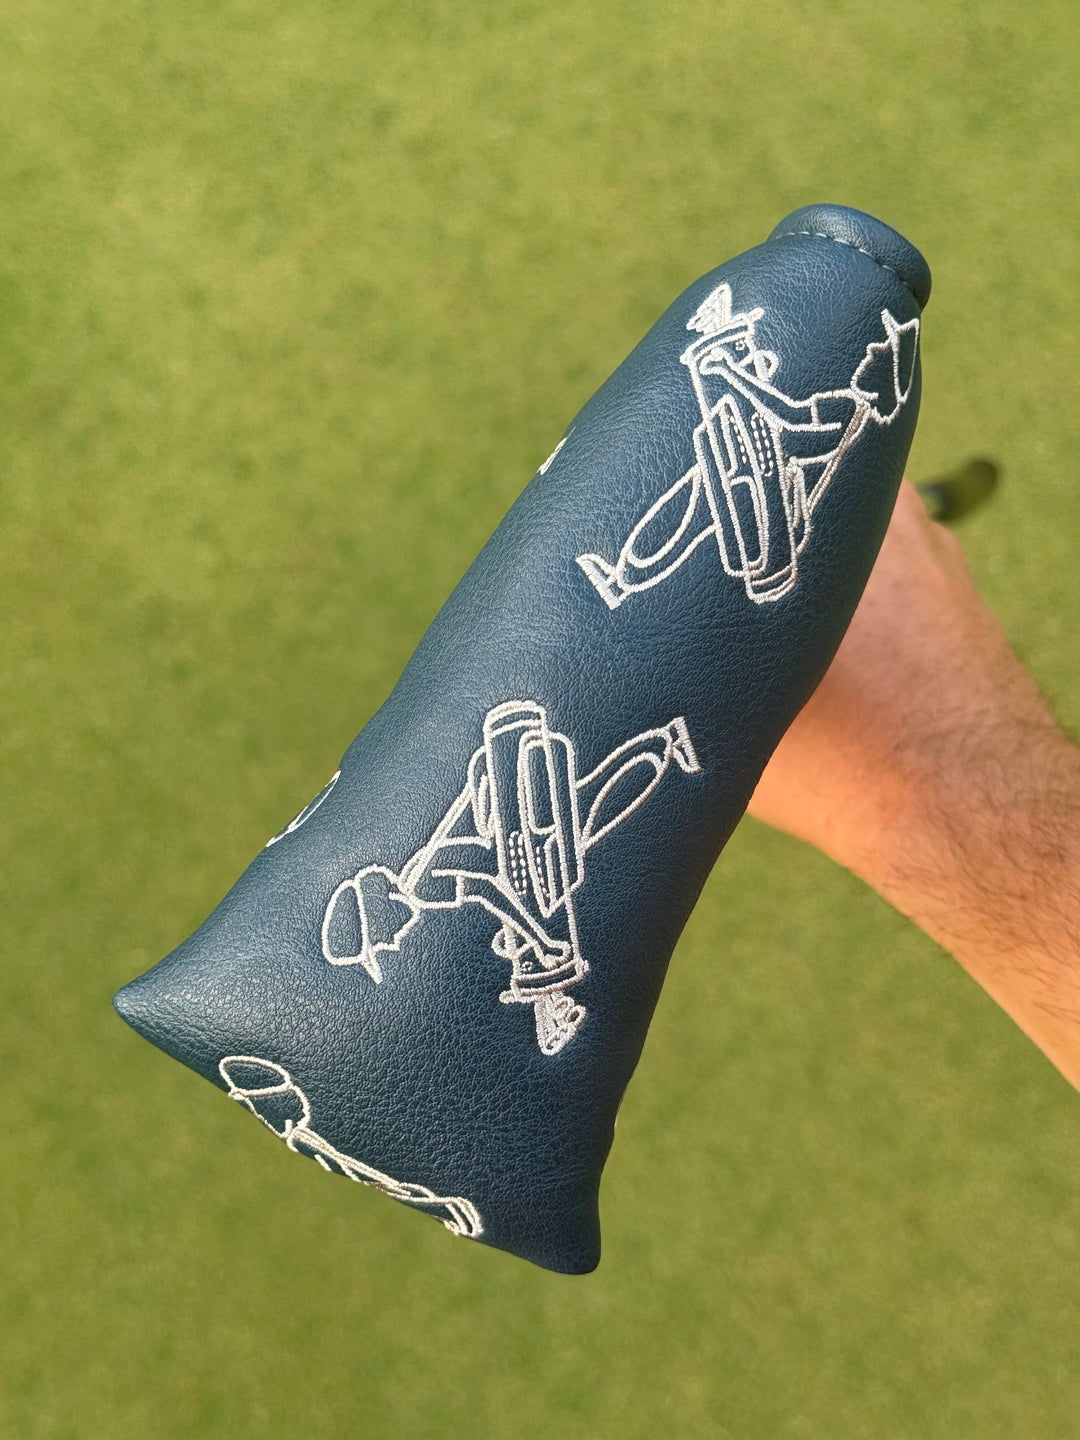 Navy Bored Caddy Logo Putter Cover